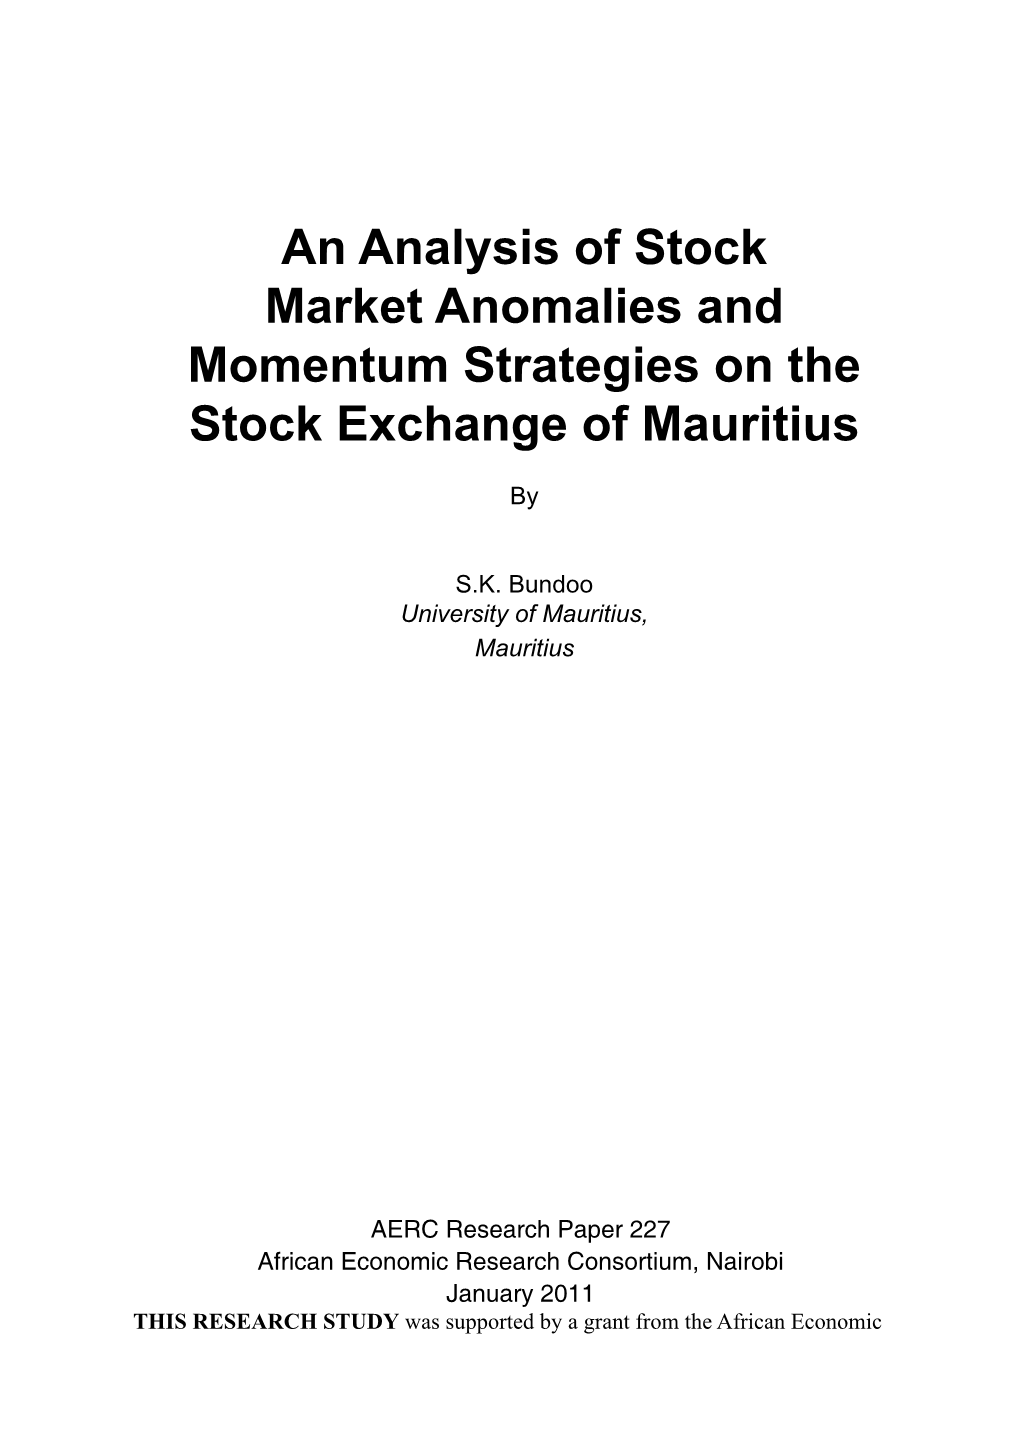 An Analysis of Stock Market Anomalies and Momentum Strategies on the Stock Exchange of Mauritius